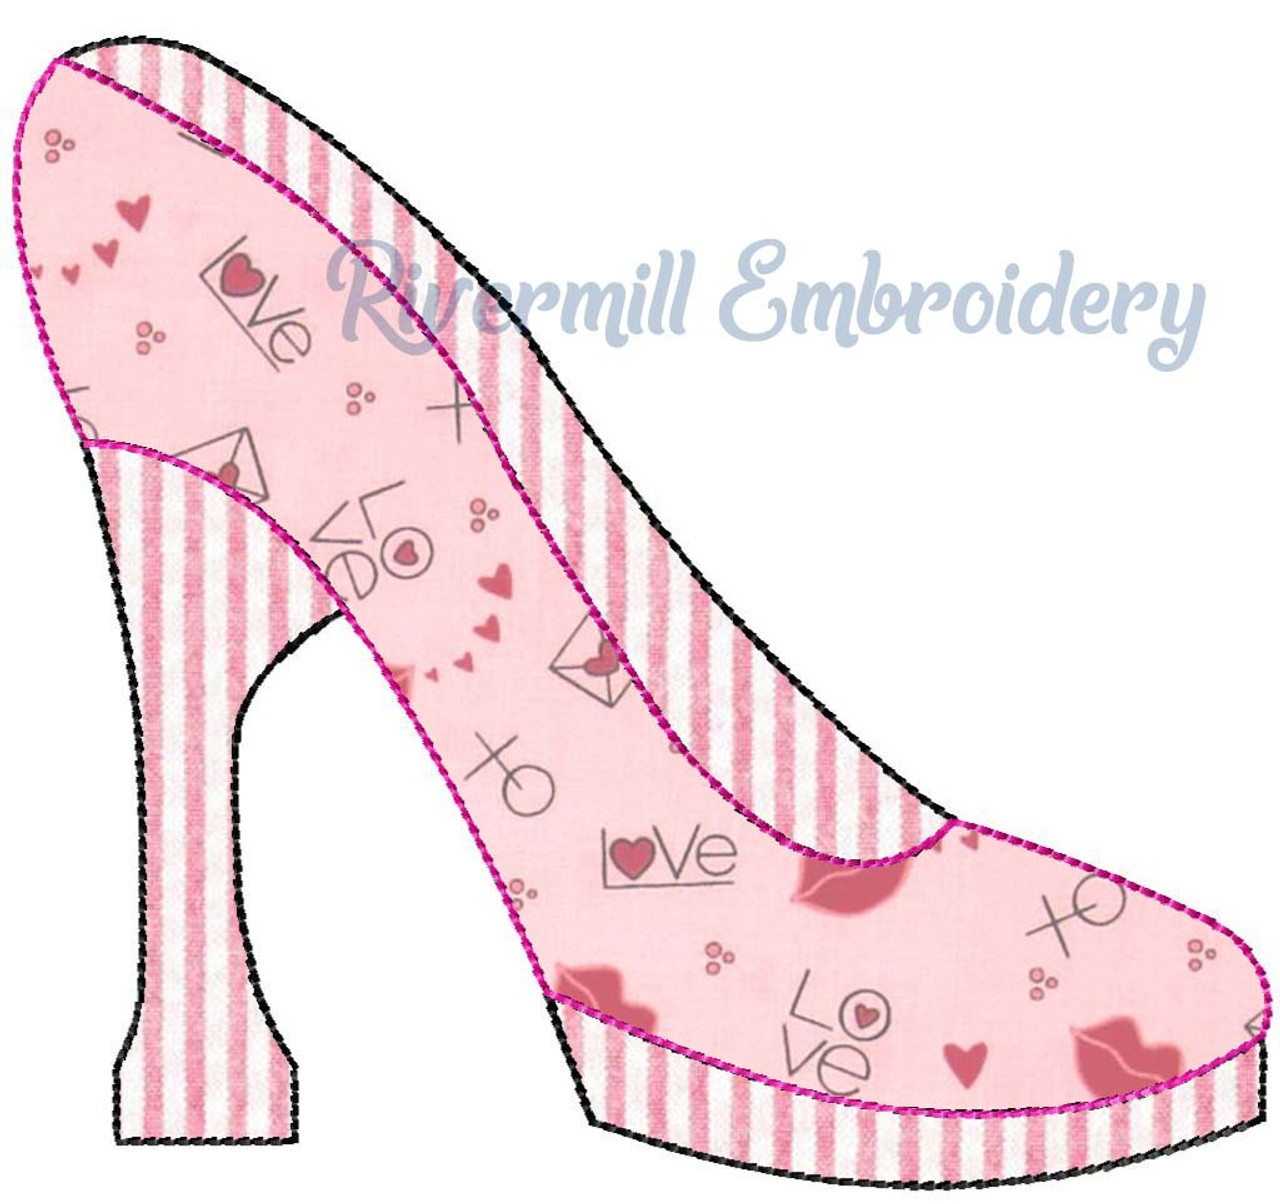 Buy Shoes Border Machine Embroidery Design Online in India - Etsy